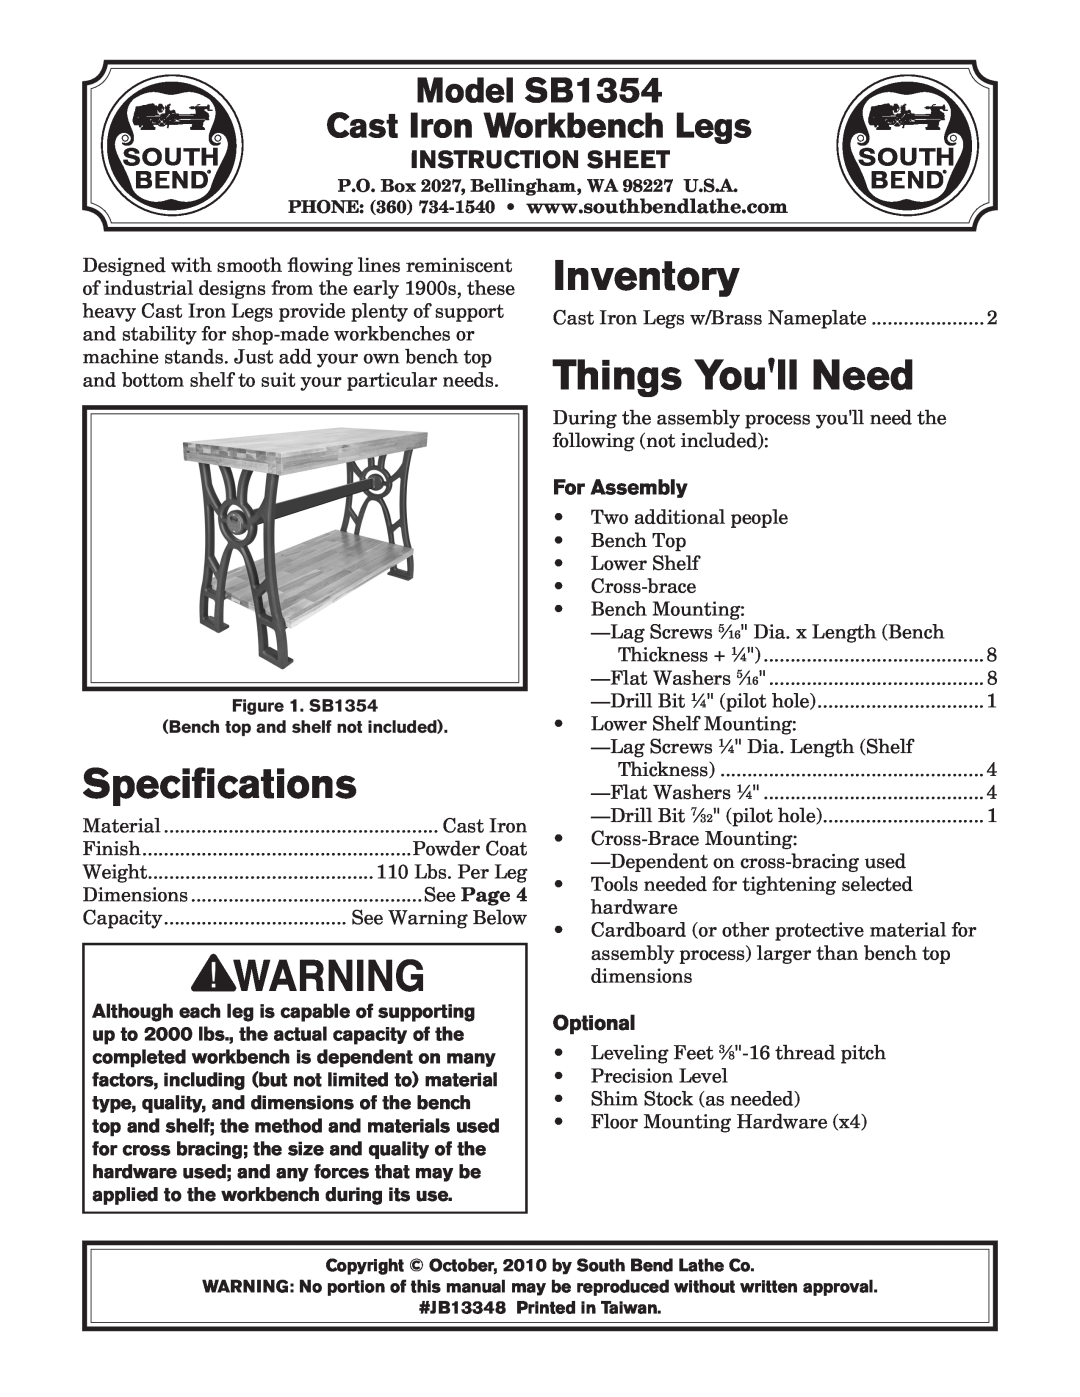 Southbend SB1354 instruction sheet Specifications, Inventory, Things Youll Need, For Assembly, Optional, Instruction Sheet 